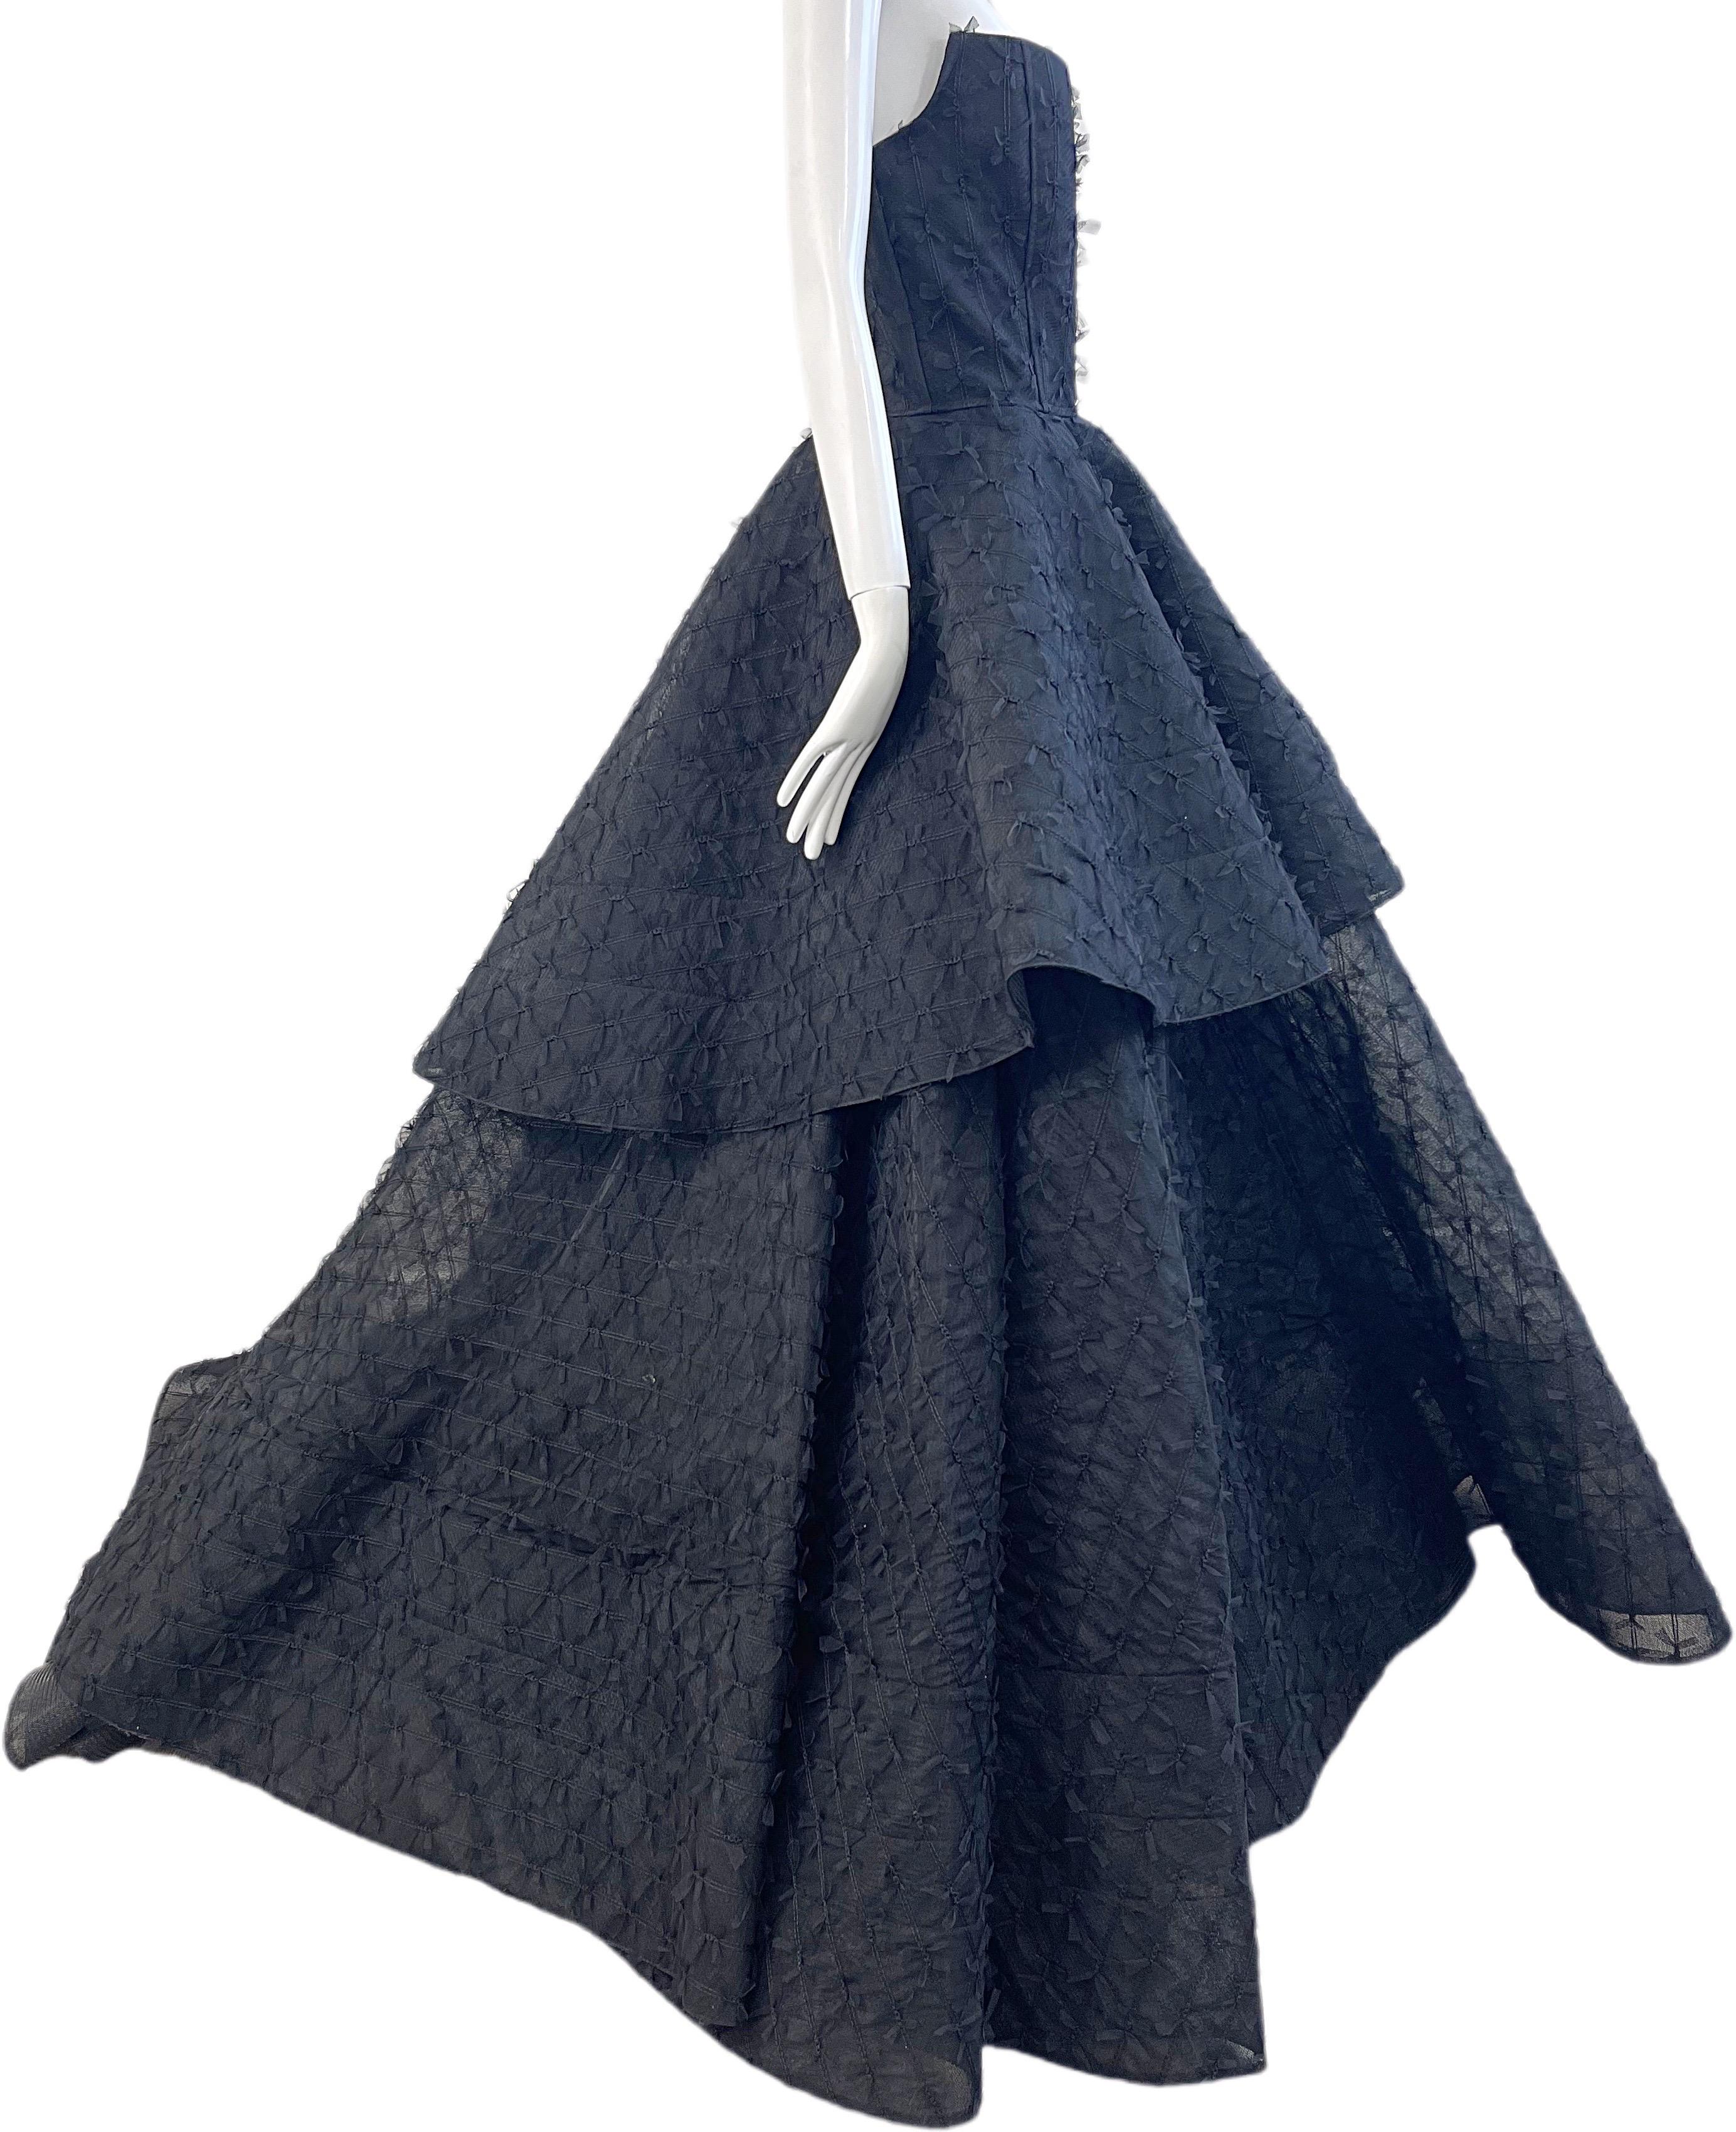 Christian Siriano Couture Spring 2019 Runway Size 4 / 6 Black Horsehair Gown For Sale 12